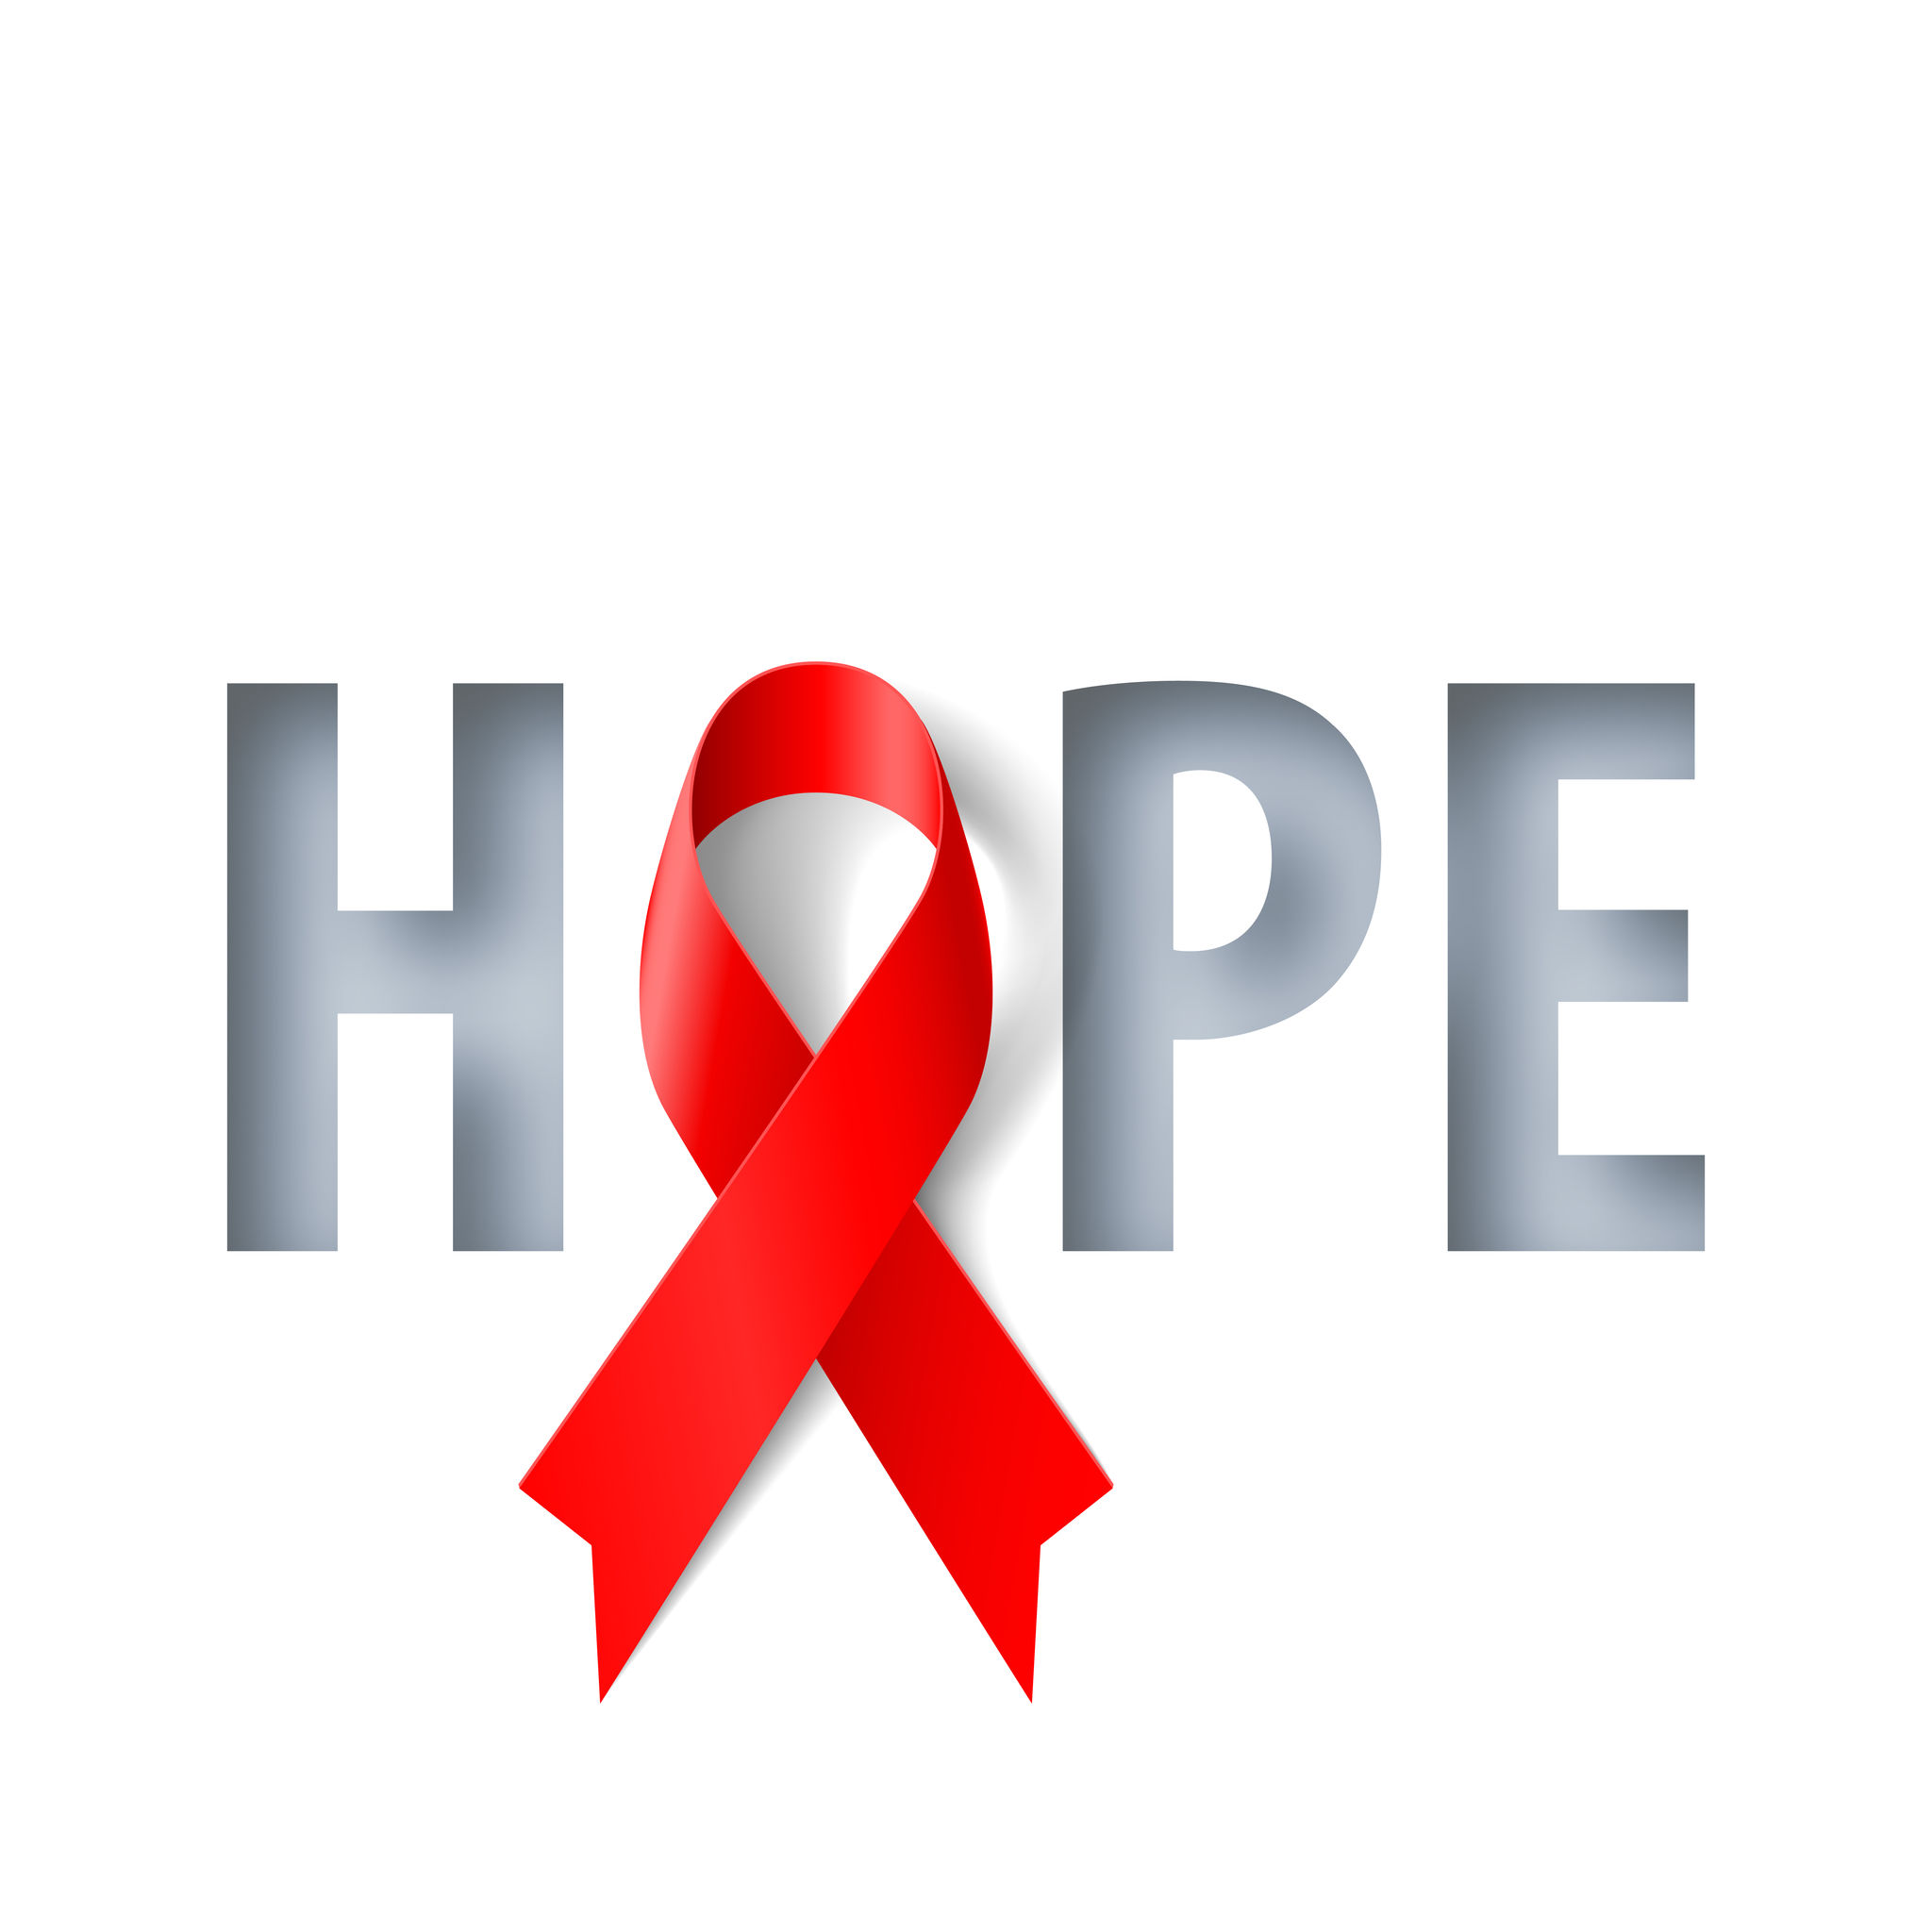 Illustrated image of a red ribbon forming the “O” in the word “hope”